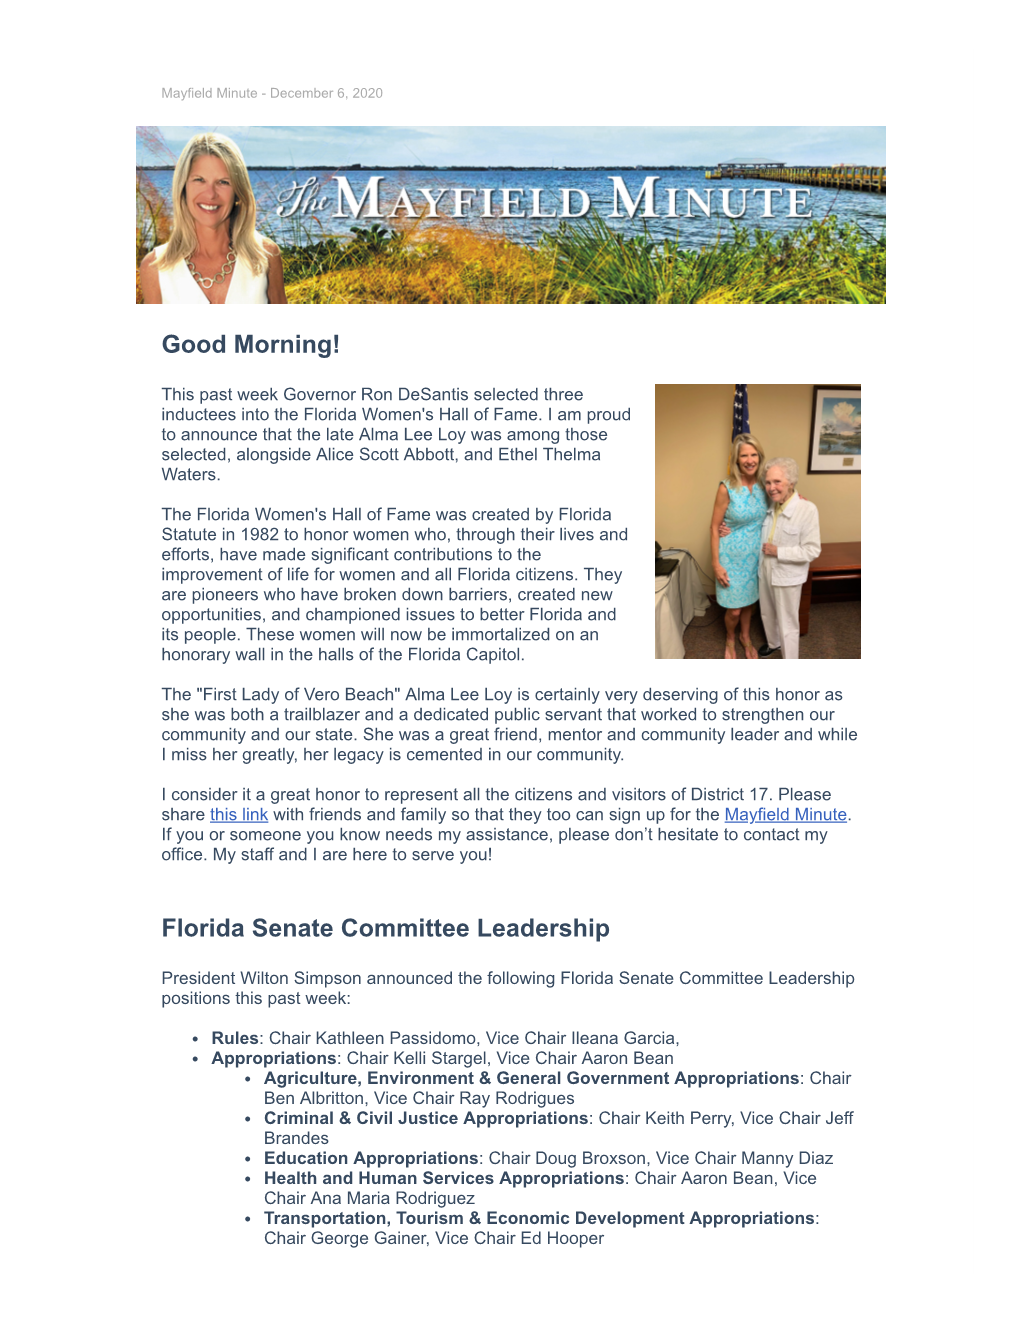 The Mayfield Minute with Senator Debbie Mayfield